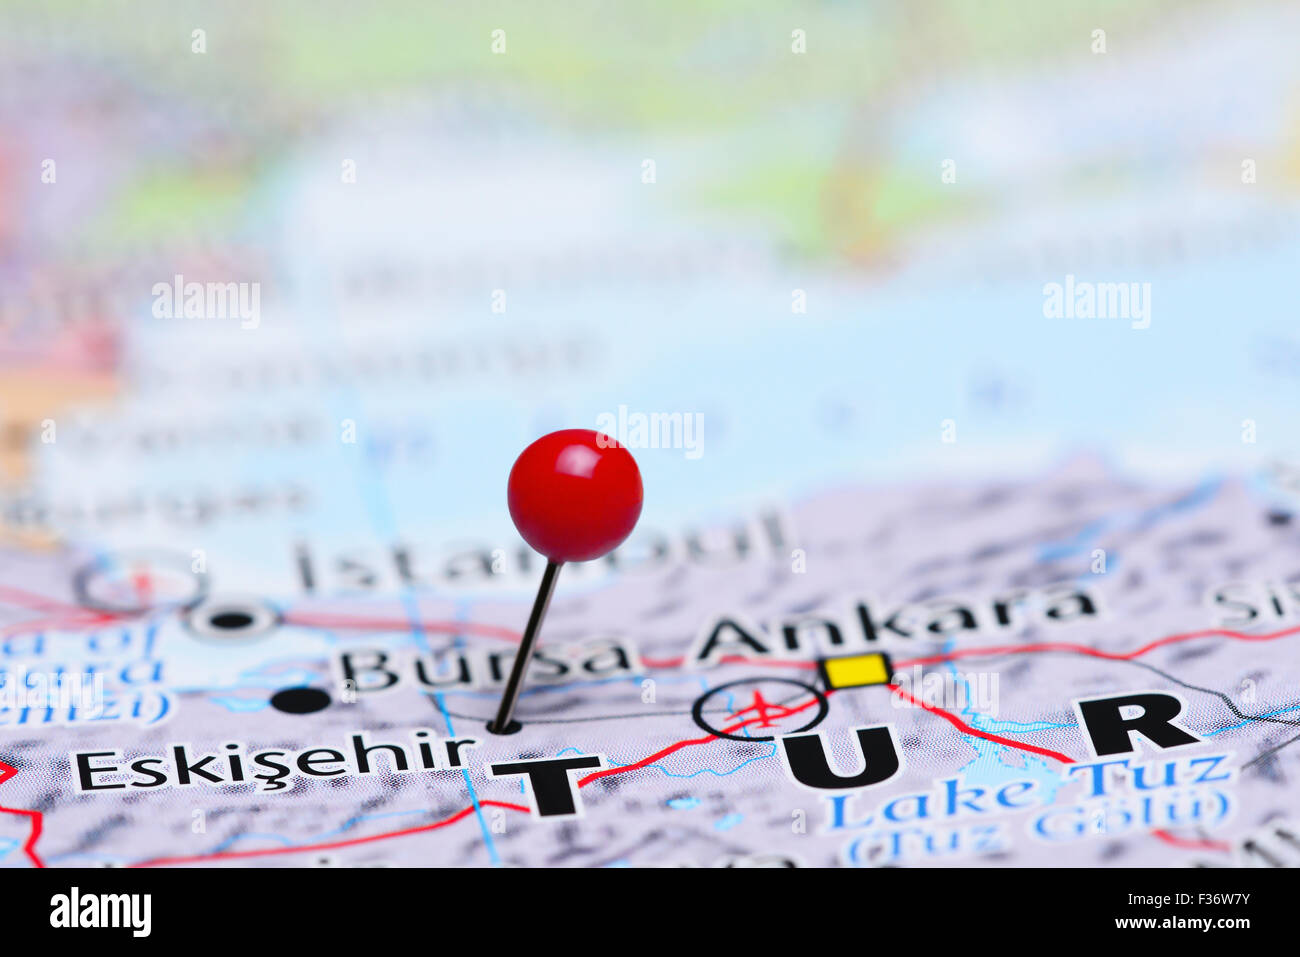 Eskisehir pinned on a map of Asia Stock Photo